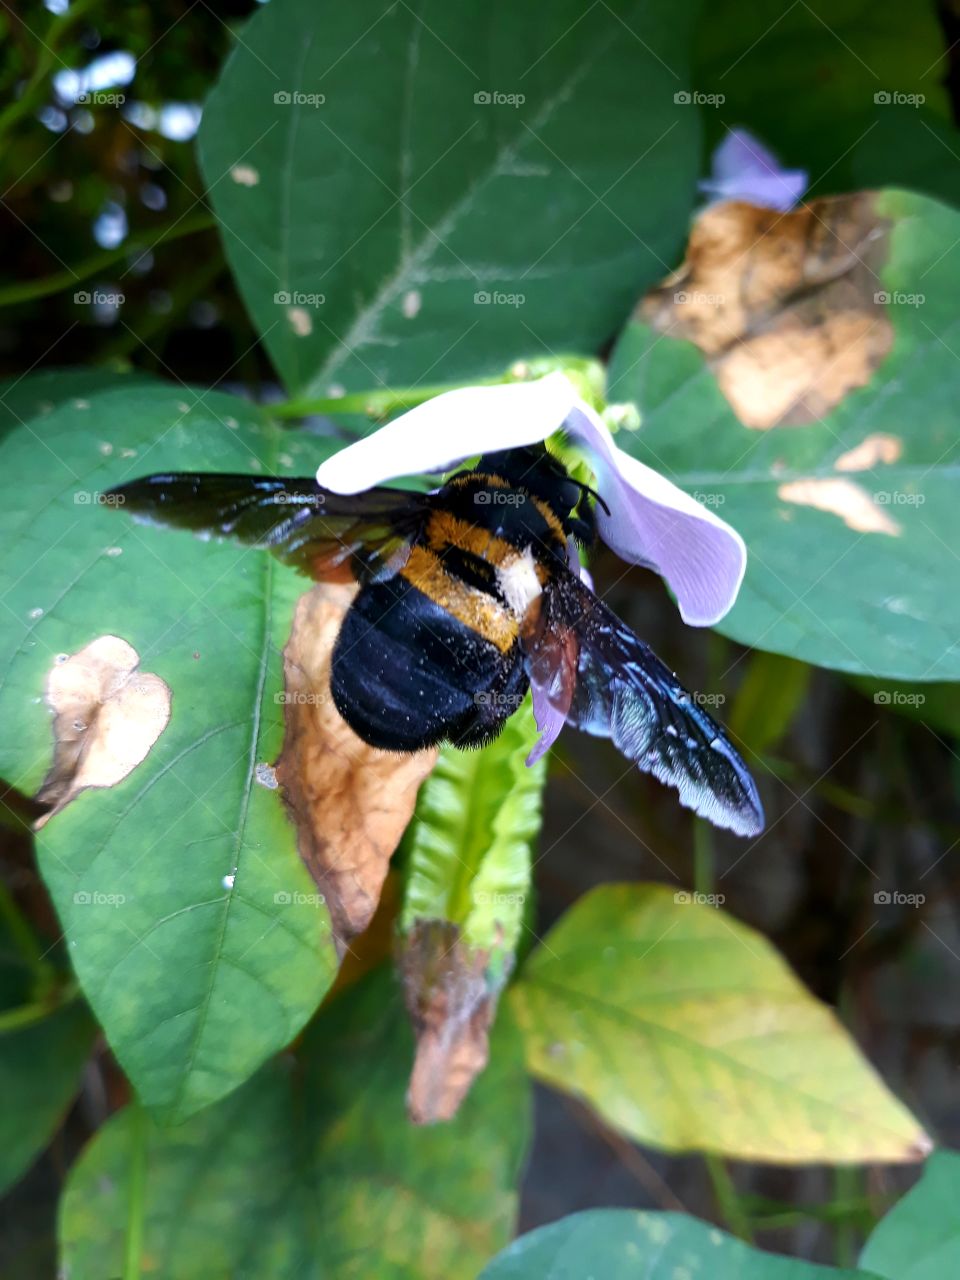 I noticed this bee is distinctly bigger than most I see doing their pollination rounds in my garden. Is she a Queen bee?